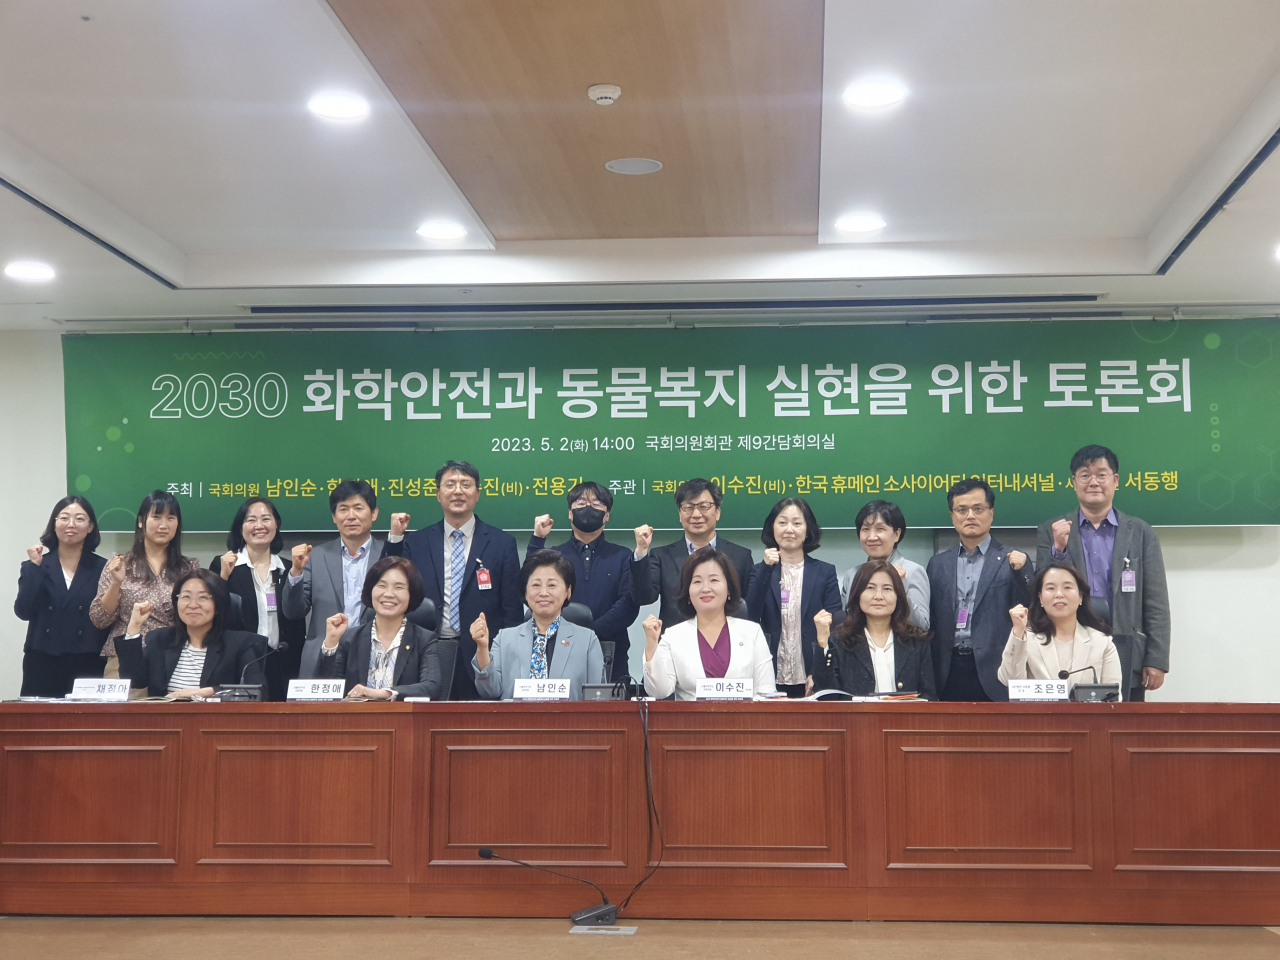 A group photo of the attendees of a joint public-private discussion forum held at the National Assembly on Tuesday including, Chae-Jung Ah (left) Executive Director of Humane Society International and Reps. Han Jeoung-ae (second from left), Nam In-soon (third from left).